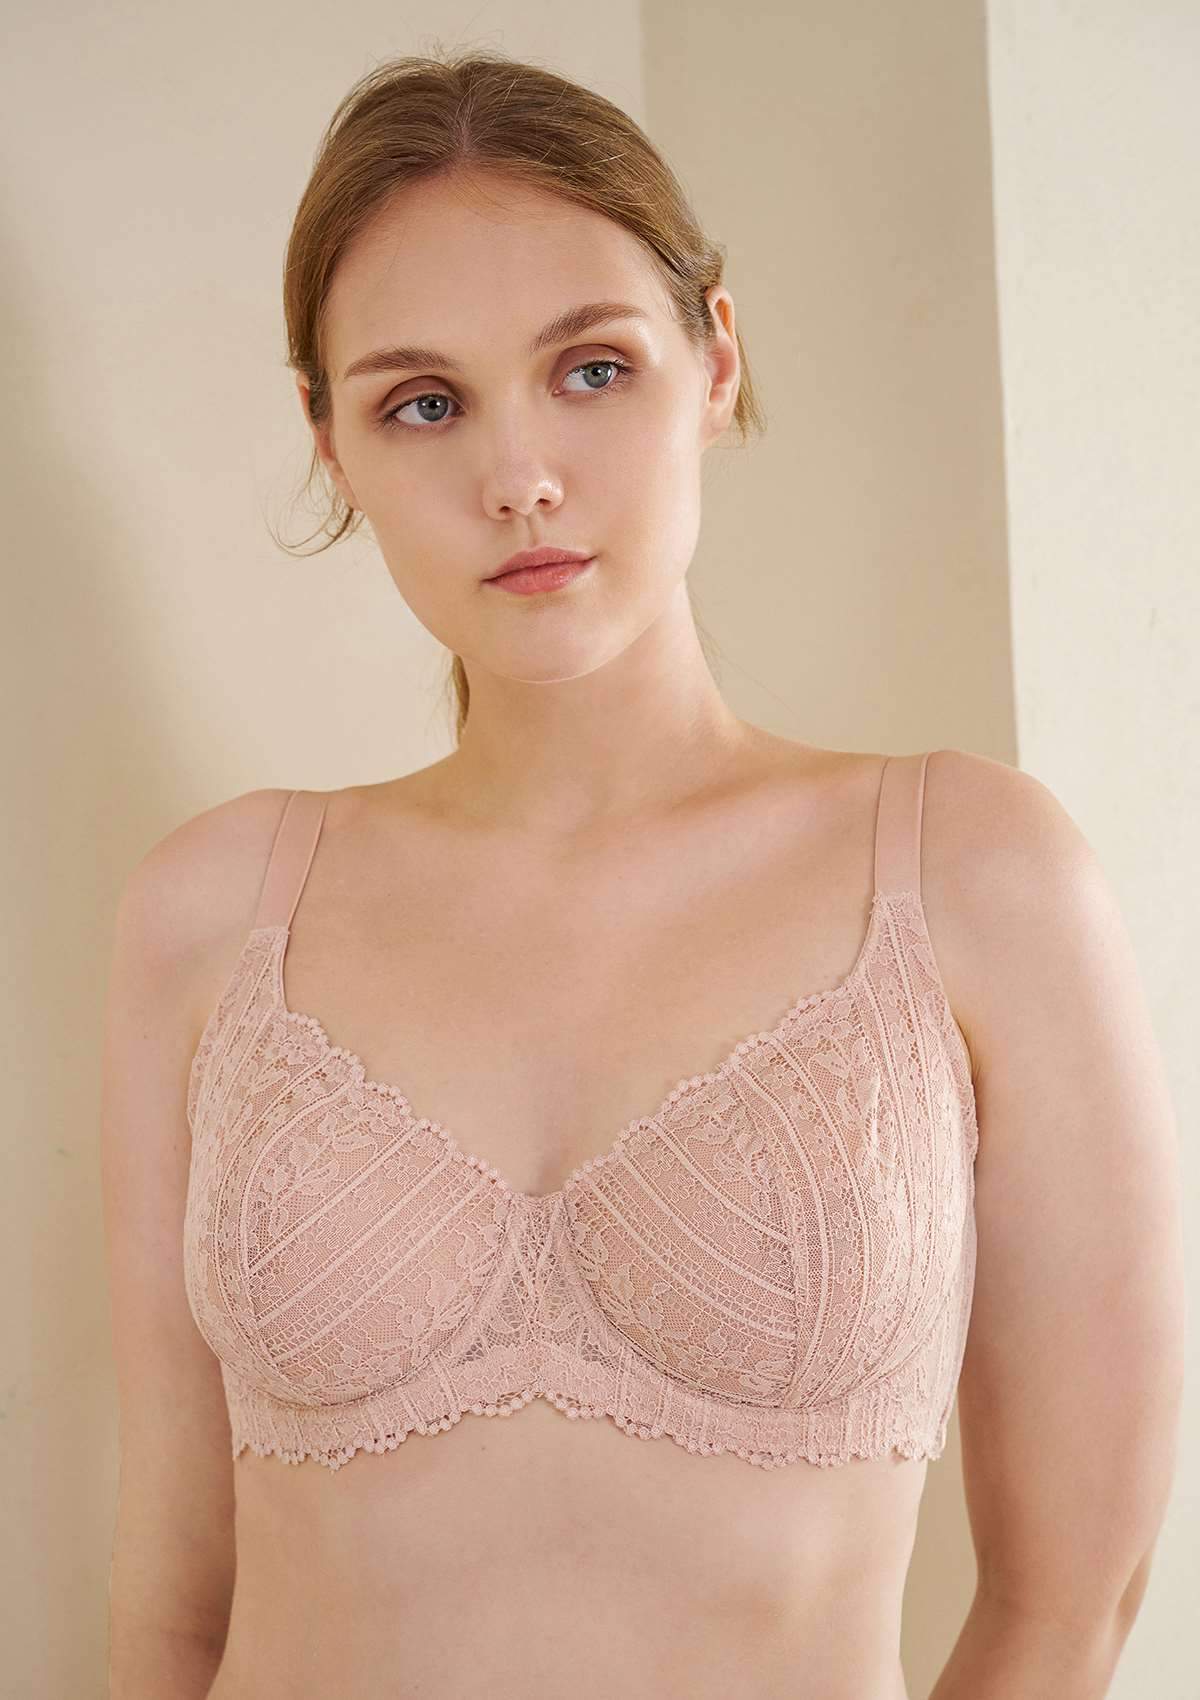 HSIA Vertical Lace Up Bra: Plus Size Back Smoothing Bra - Light Pink / 34 / DD/E